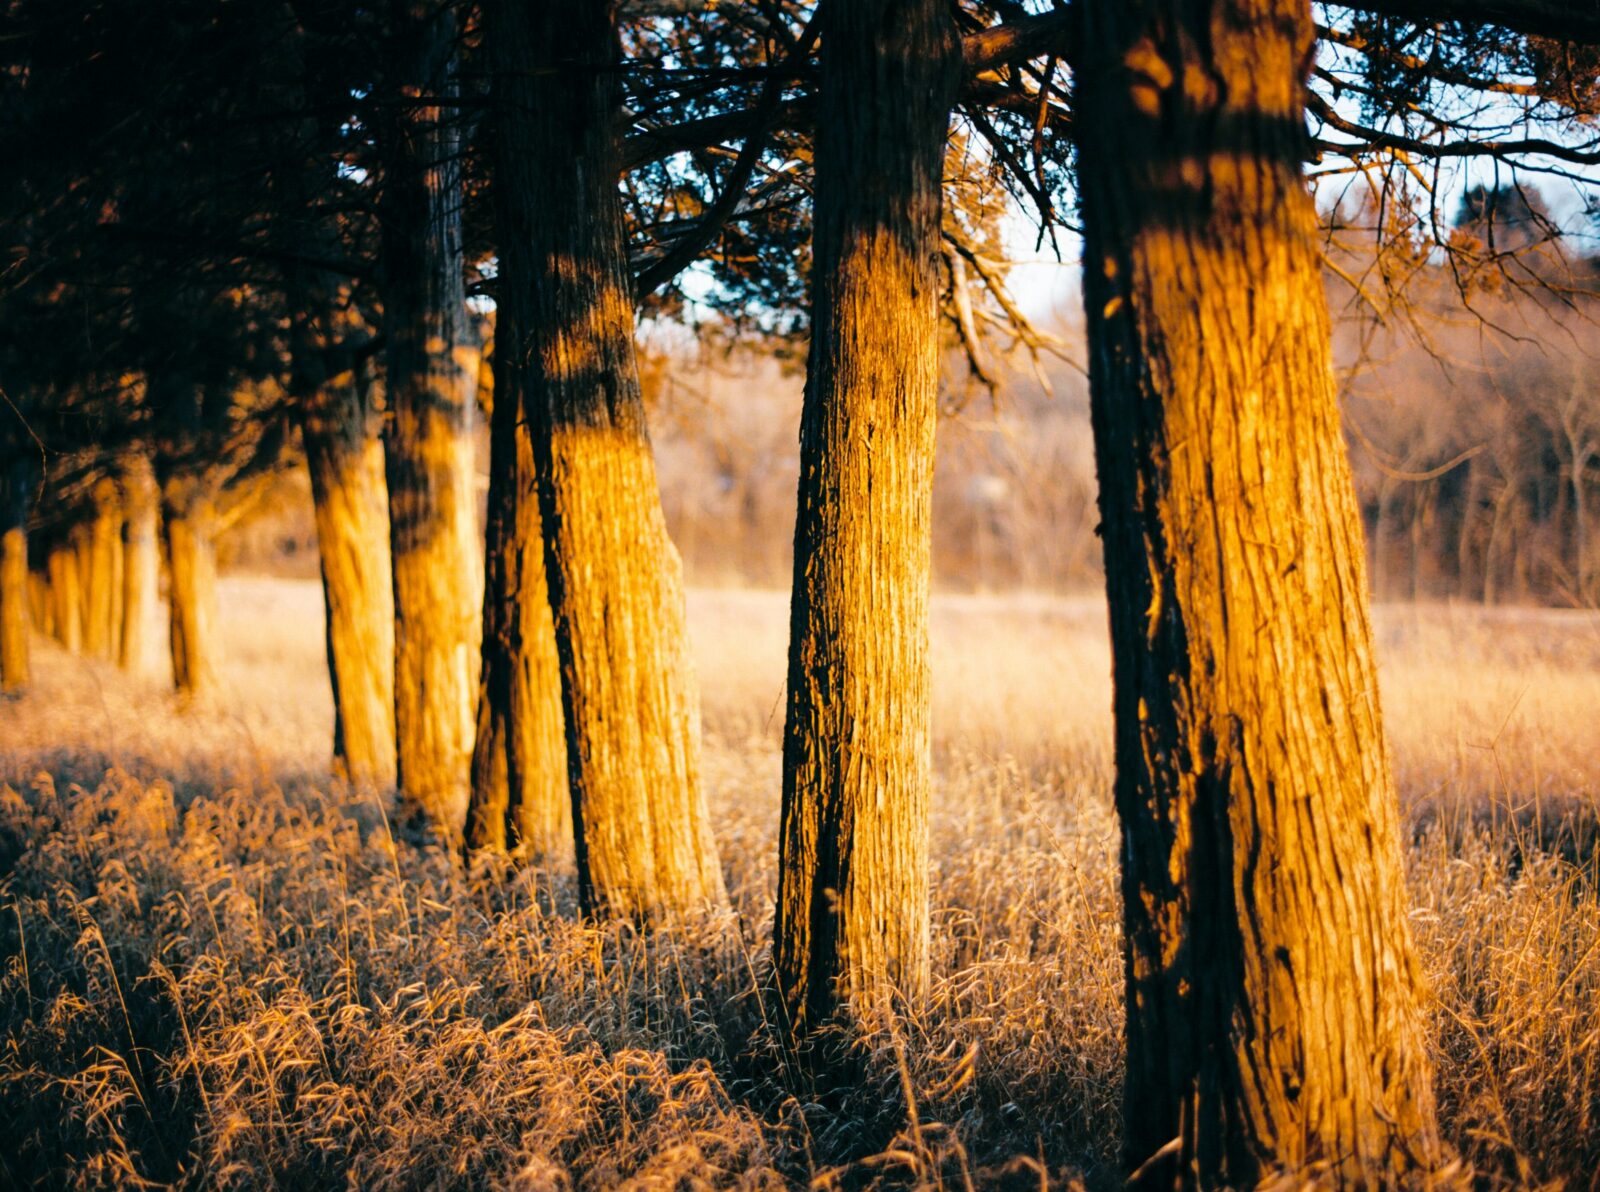 Evergreen trees are highlighed by sunlight giving a glow and shadows to the bark and surrounding grasses.